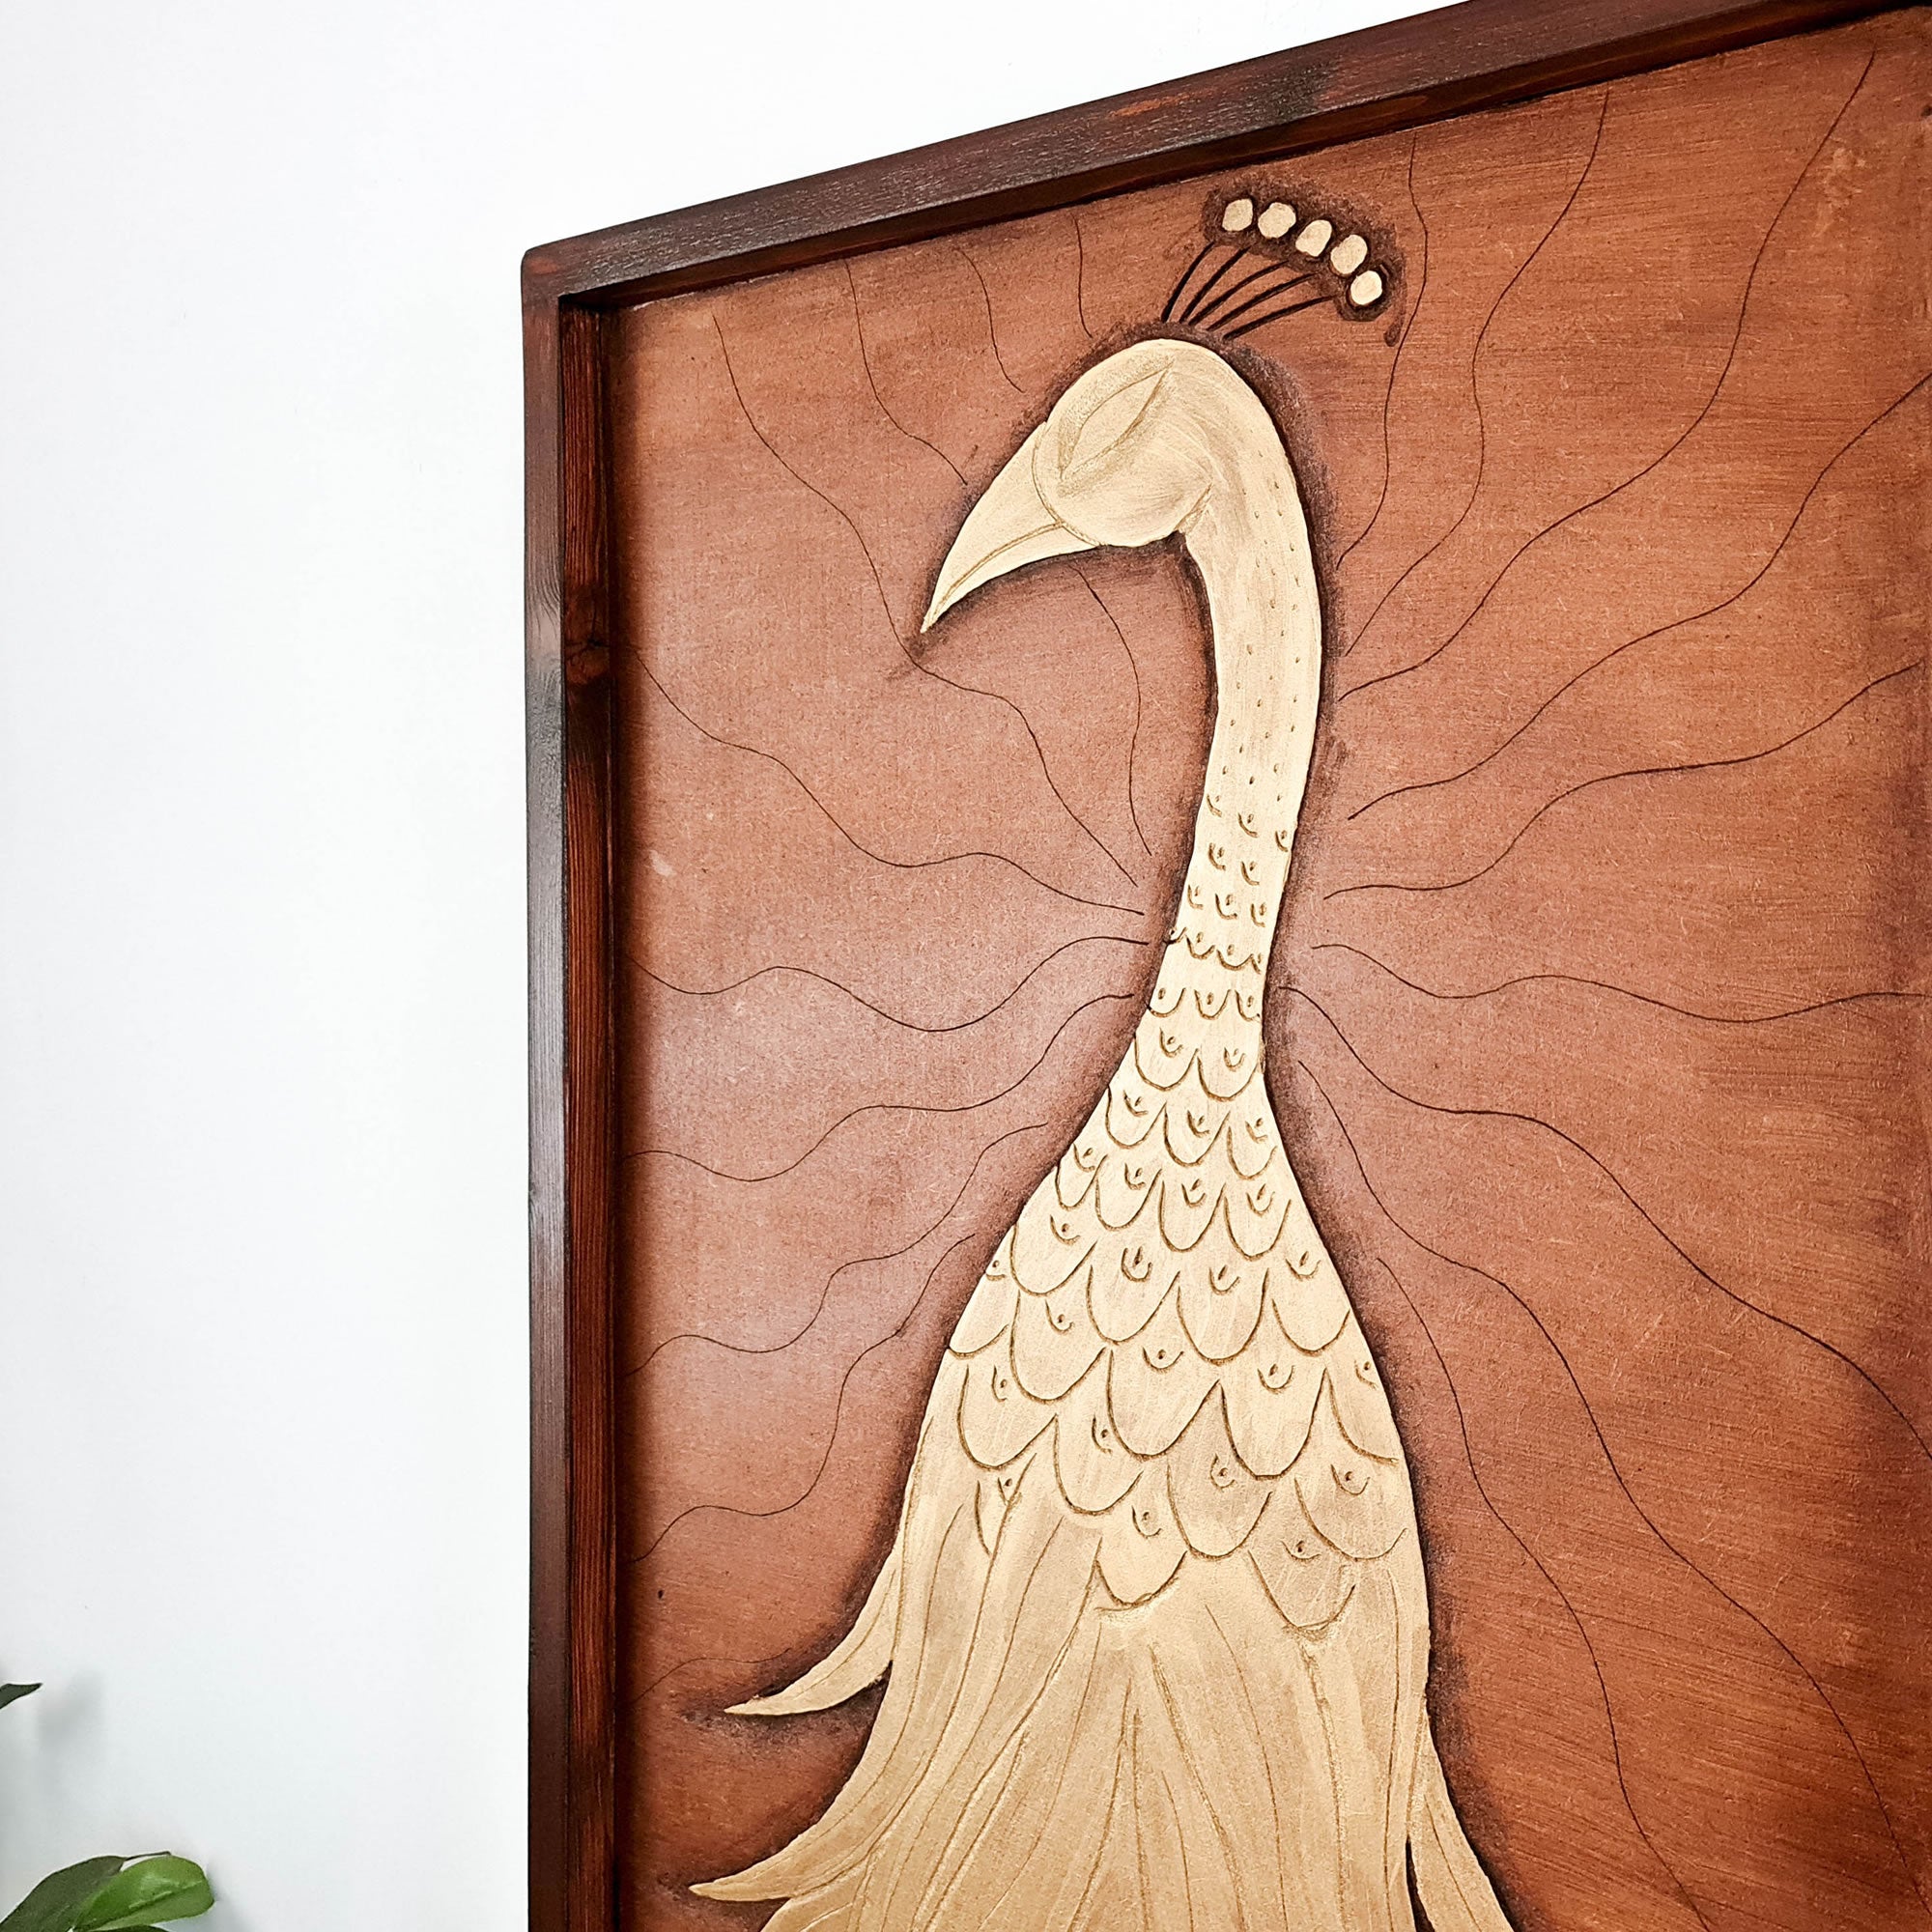 A beautifully carved wooden wall art - Golden Peacock. Handcrafted by skilled craftsmen this one-off piece is unique and simply amazing.